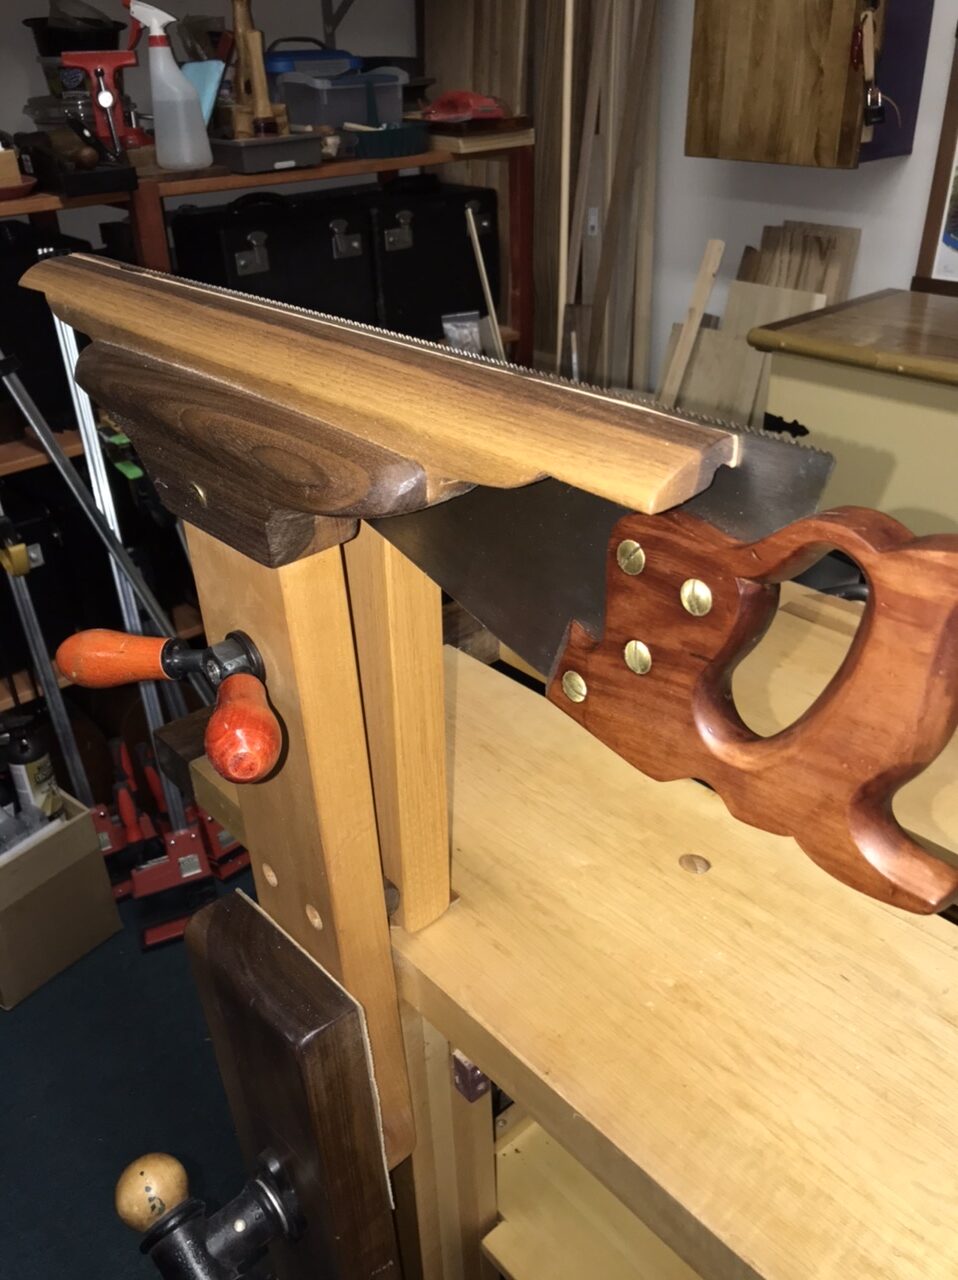 What a way to finish a saw vise!